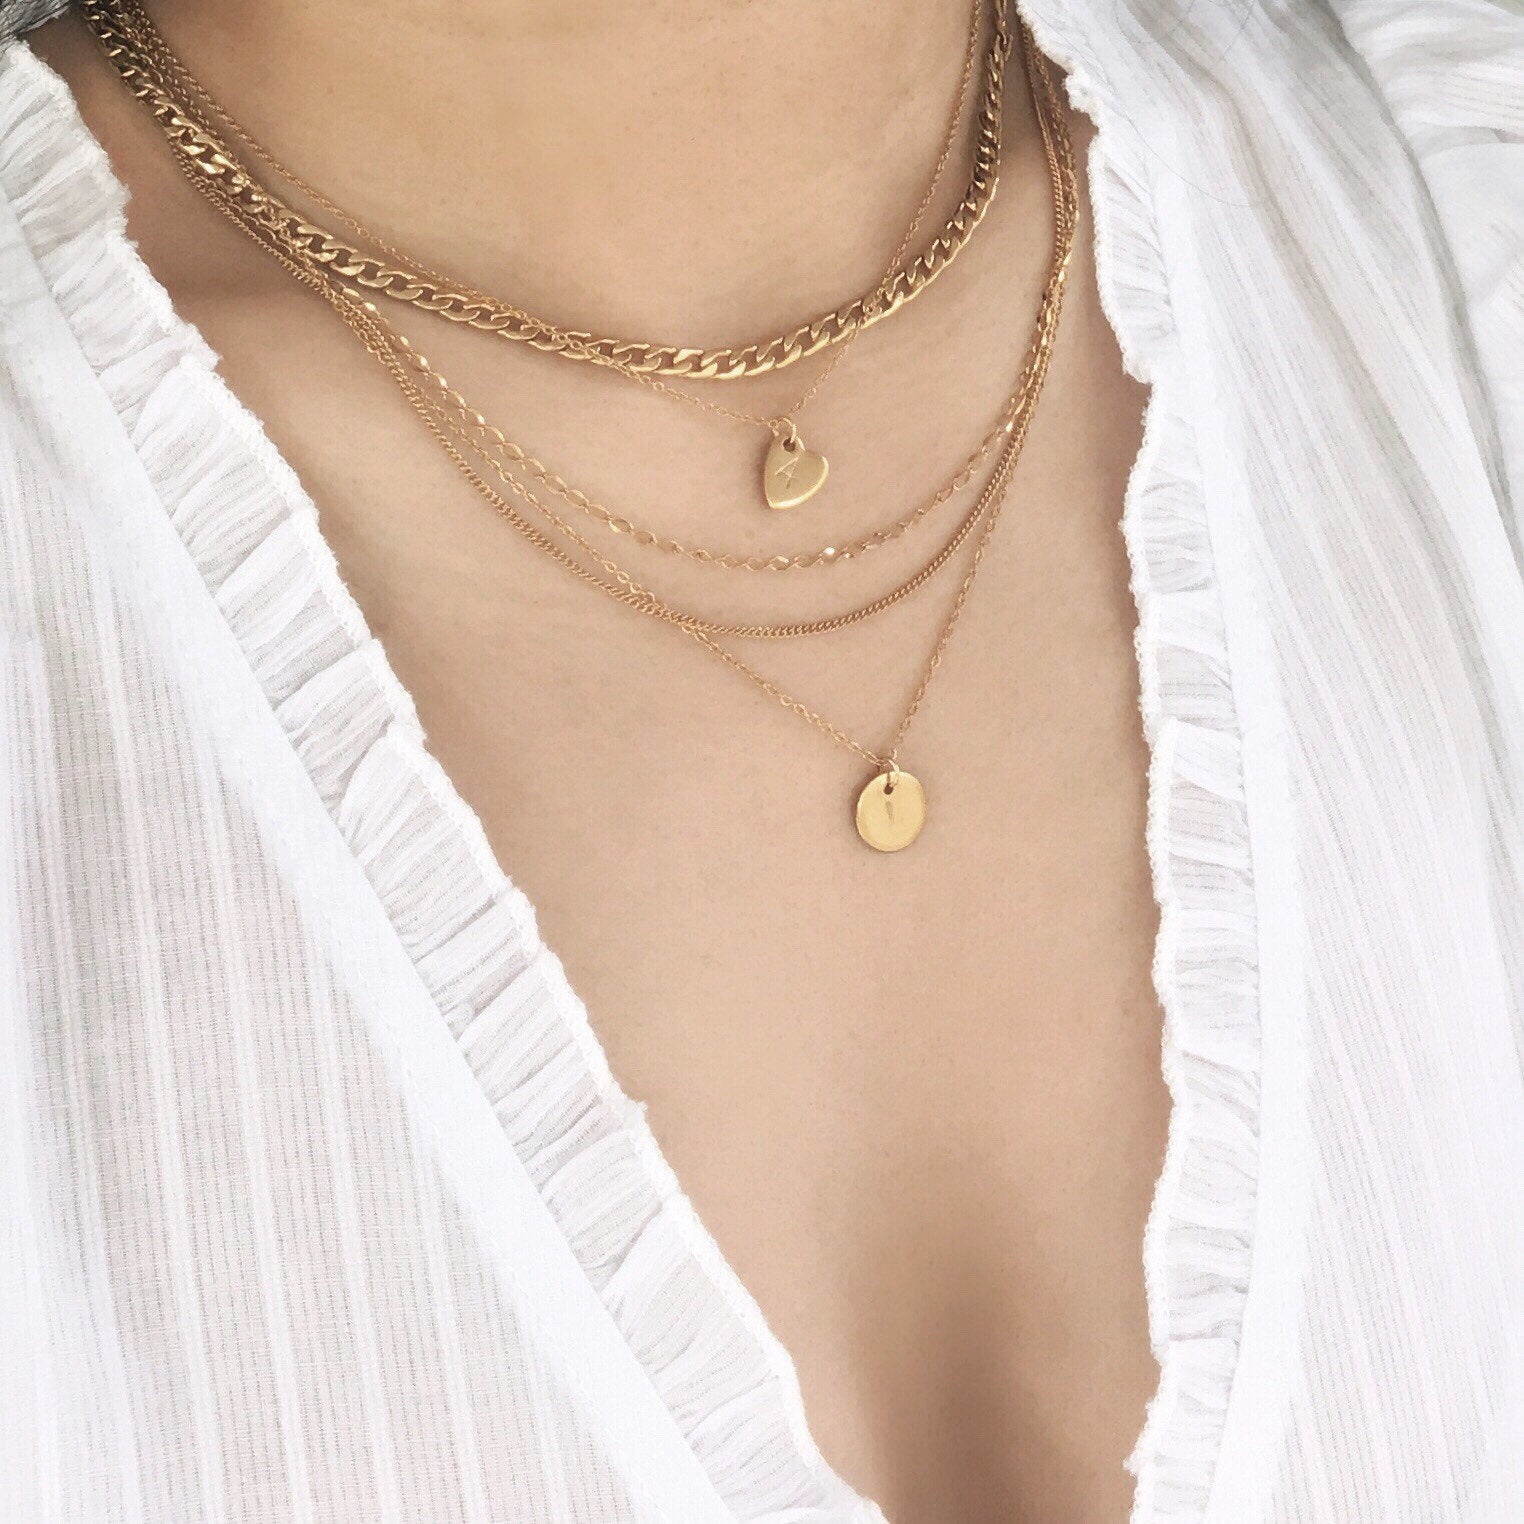 Round Initial Necklace -gold initial necklace, gold personalized choker necklace, initial choker, bridesmaids gifts, gifts for her |GPN00023